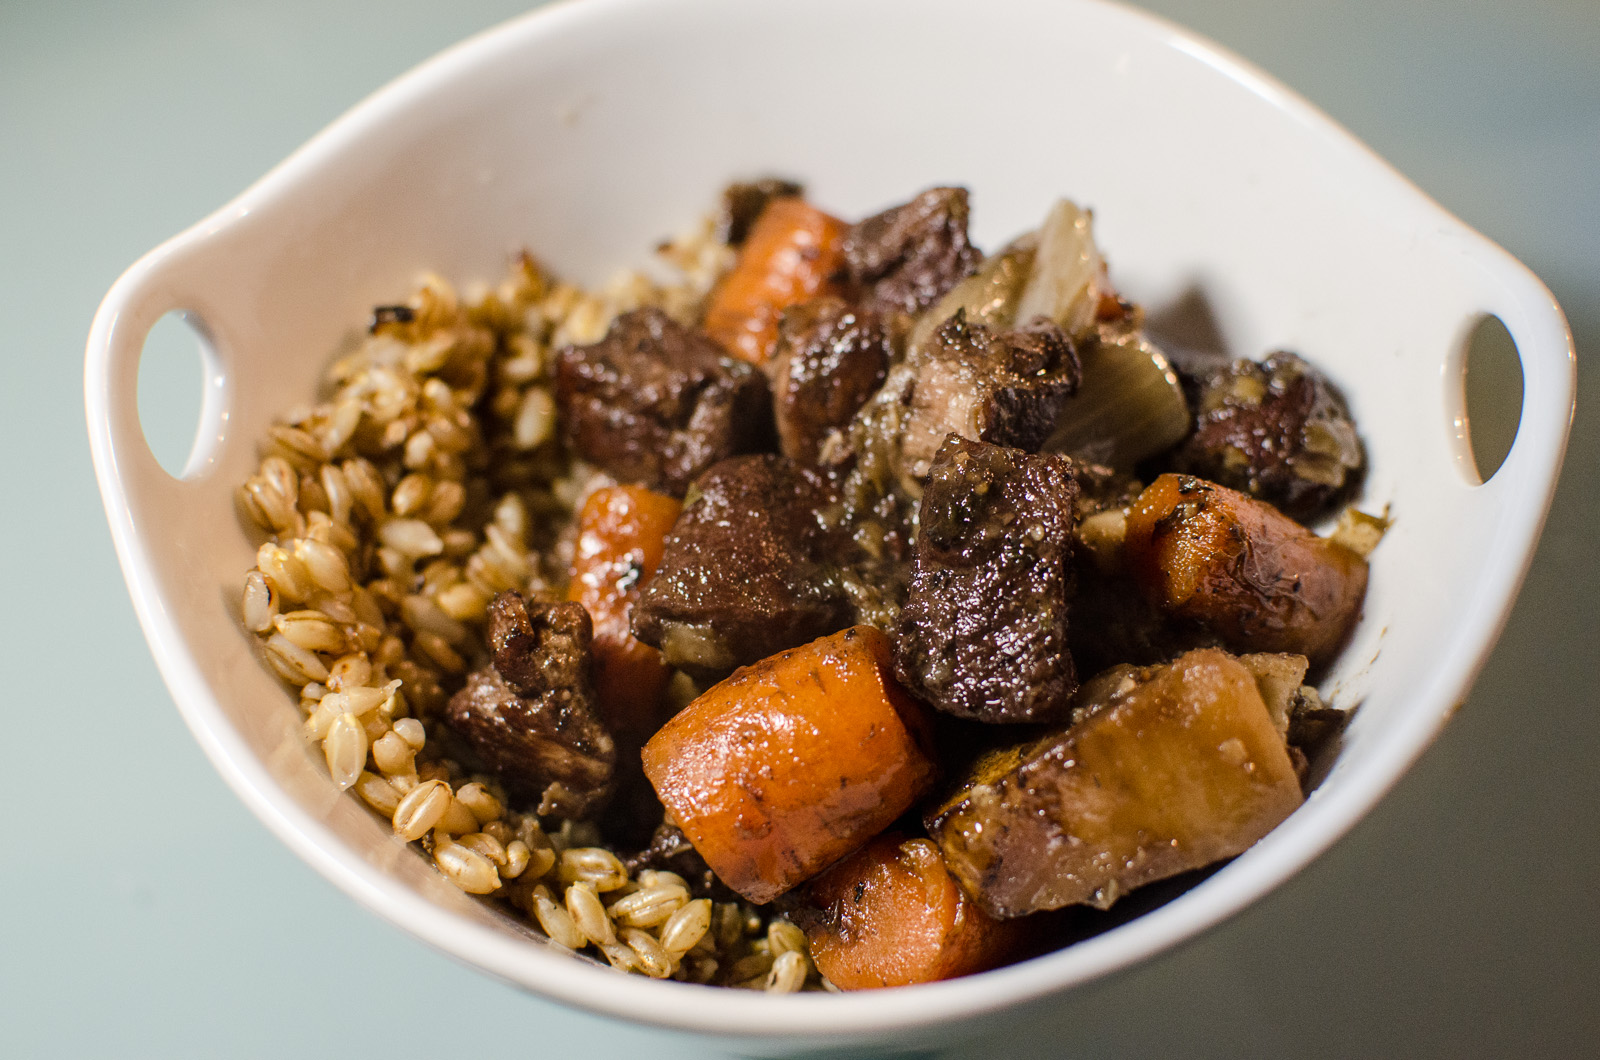 A bowl of Smith Meadows lamb stew with barley